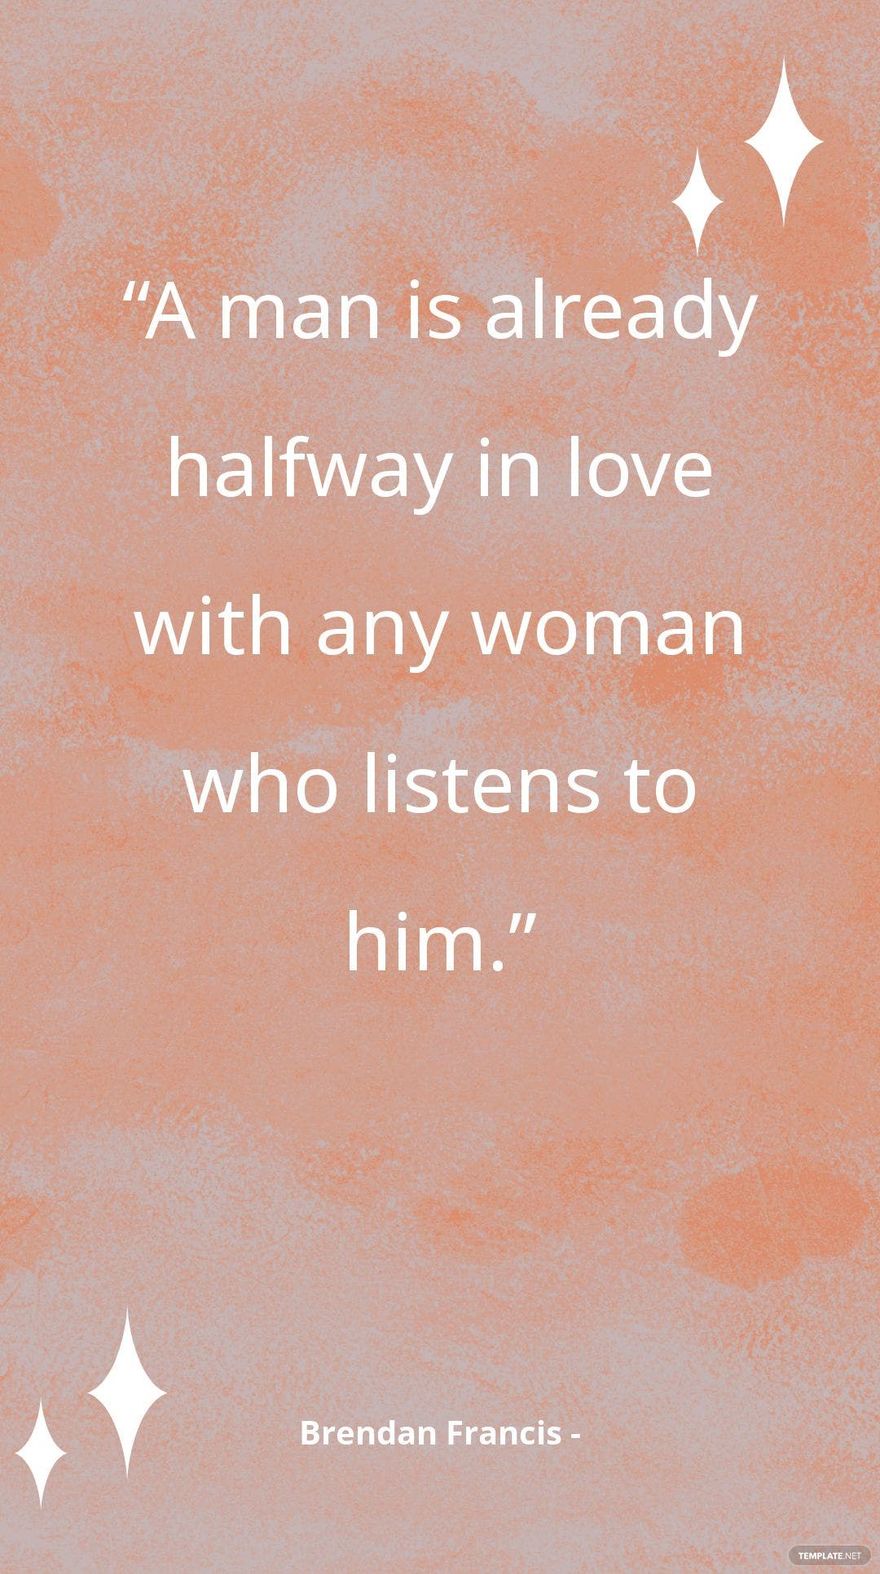 Brendan Francis - “A man is already halfway in love with any woman who listens to him.”